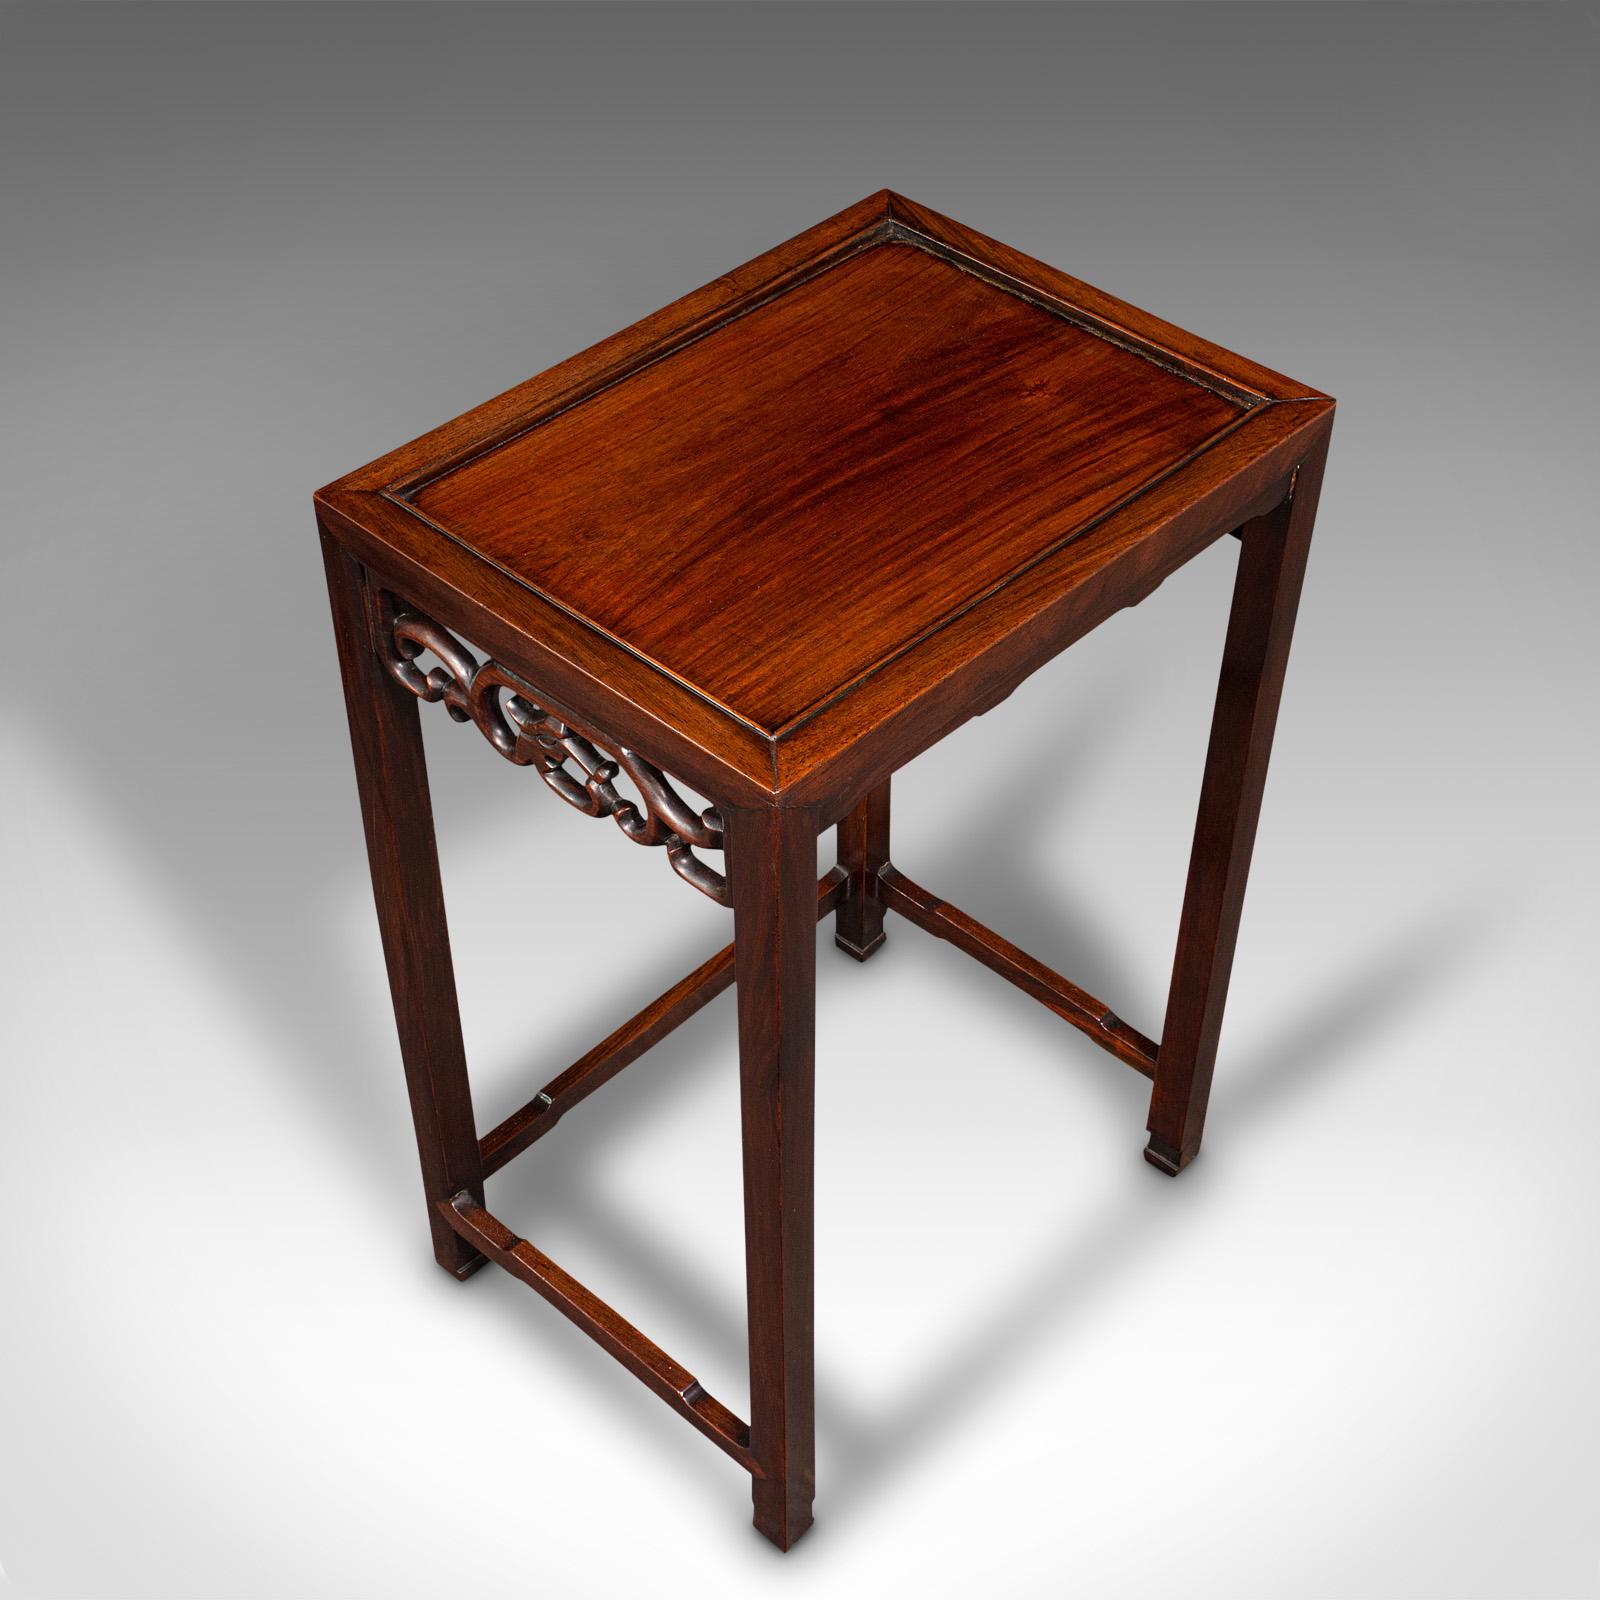 Antique Quartetto Nesting Tables, Chinese, Occasional, Victorian, Circa 1900 For Sale 3